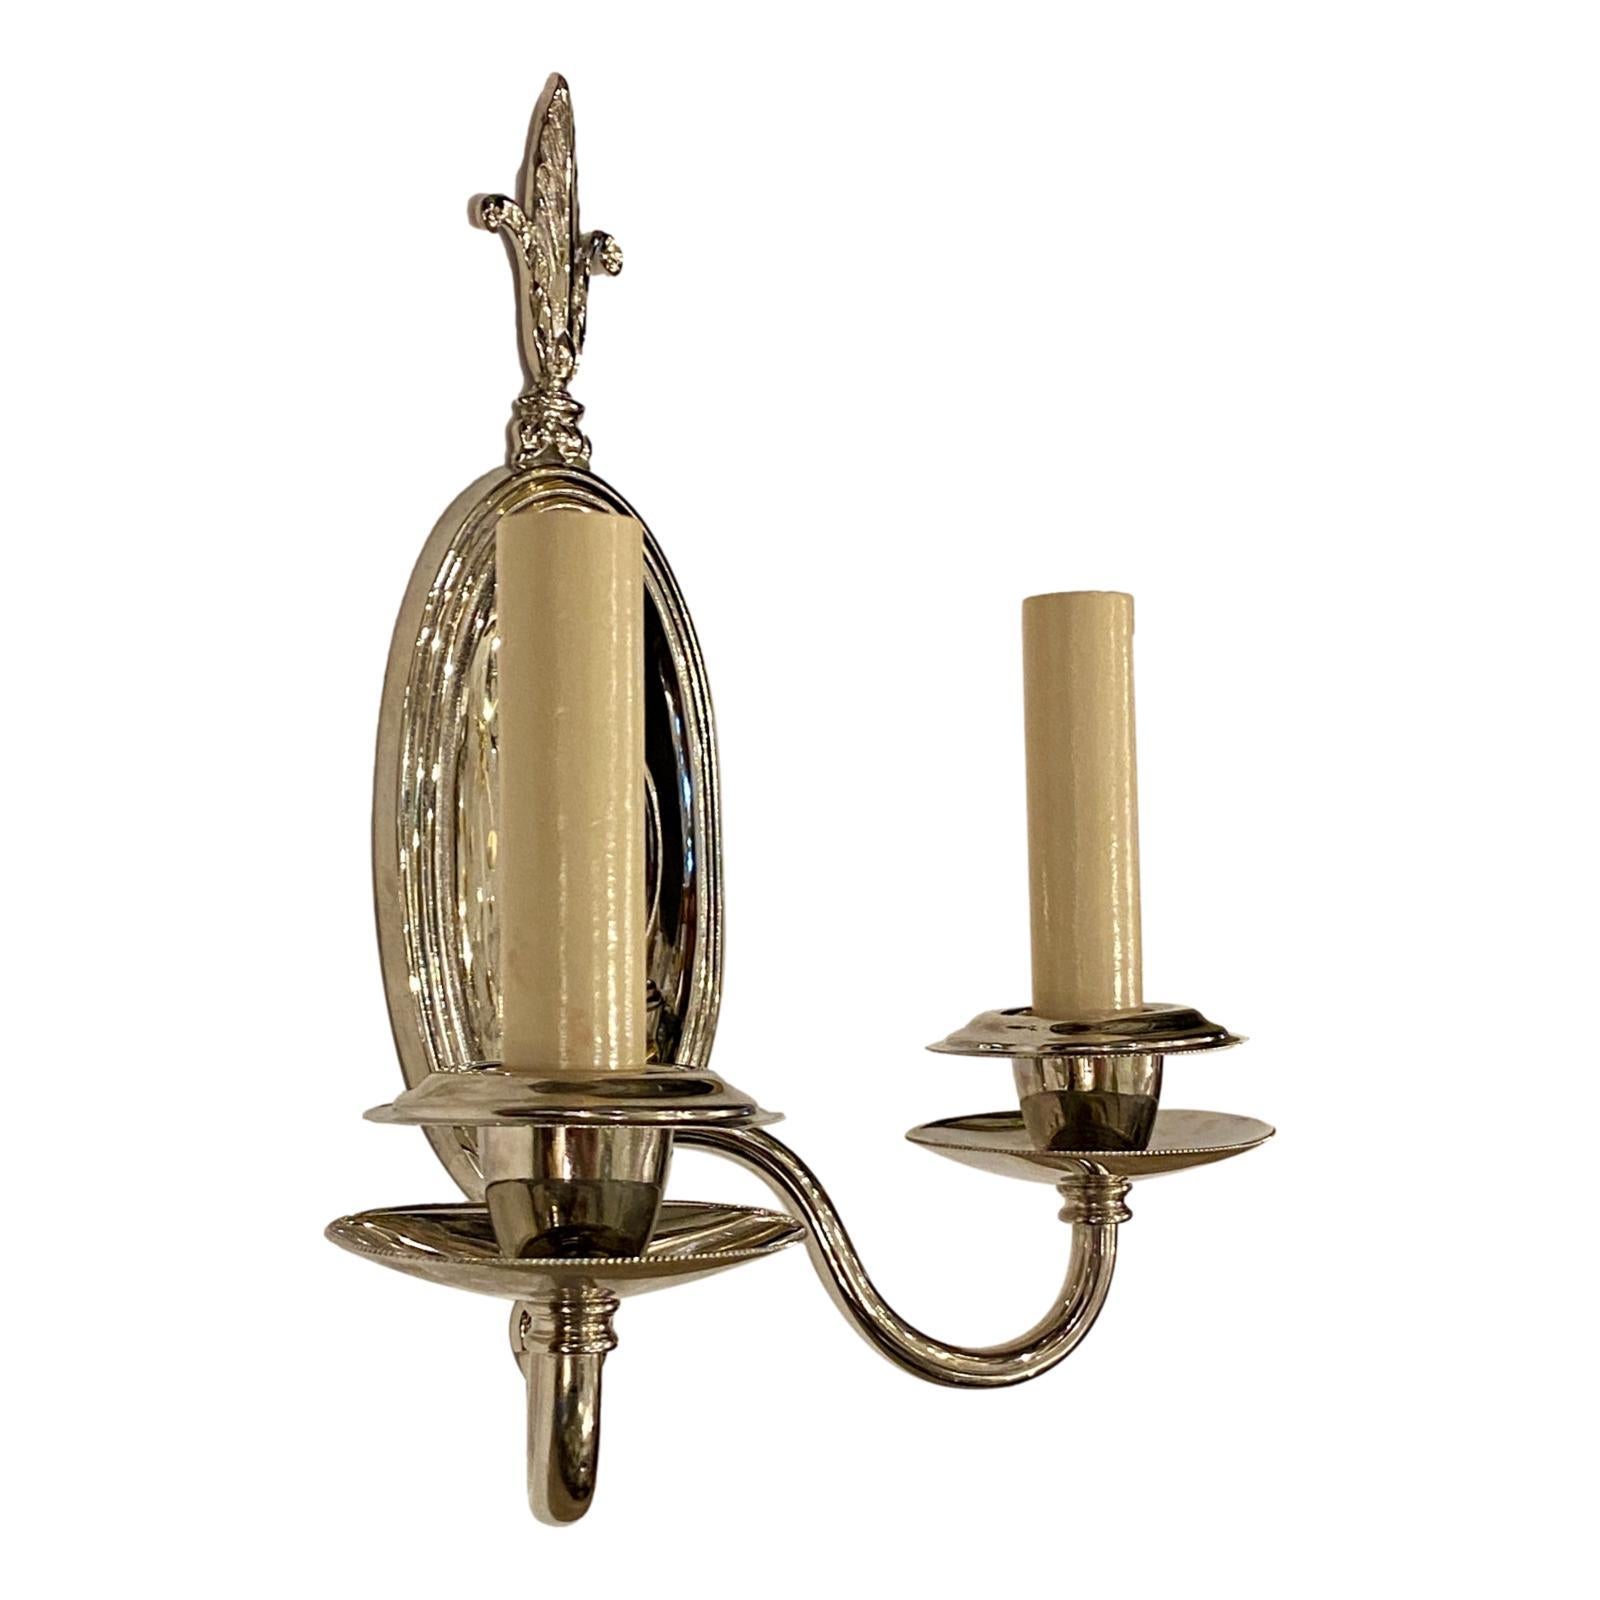 A pair of circa 1920's French neoclassic style nickel-plated two-arm sconces.

Measurements:
Height: 10.5